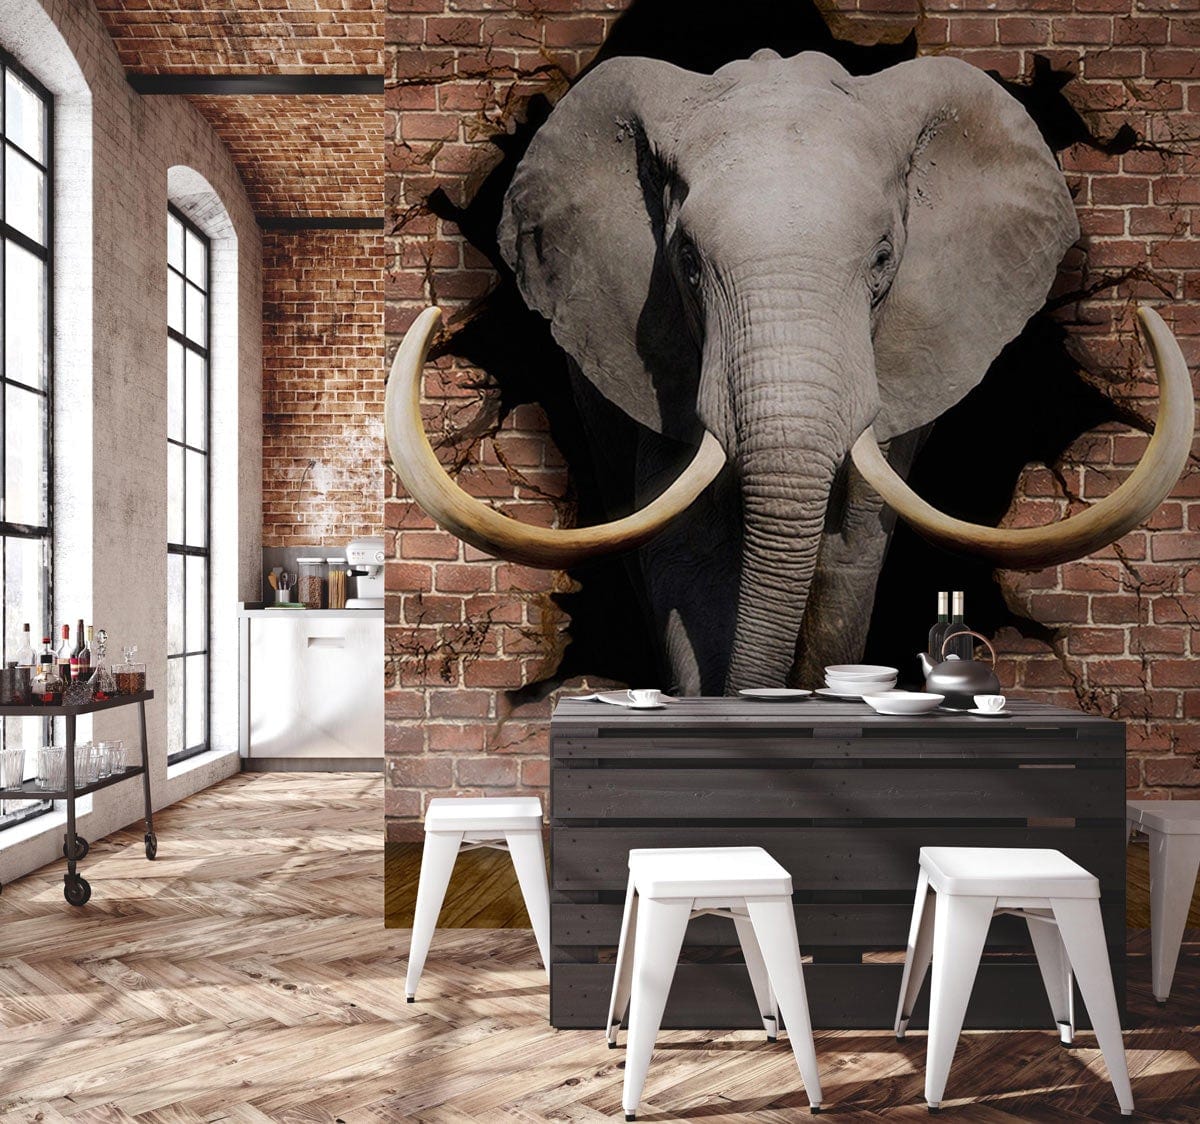 This dining room wallpaper has a 3D elephant mural